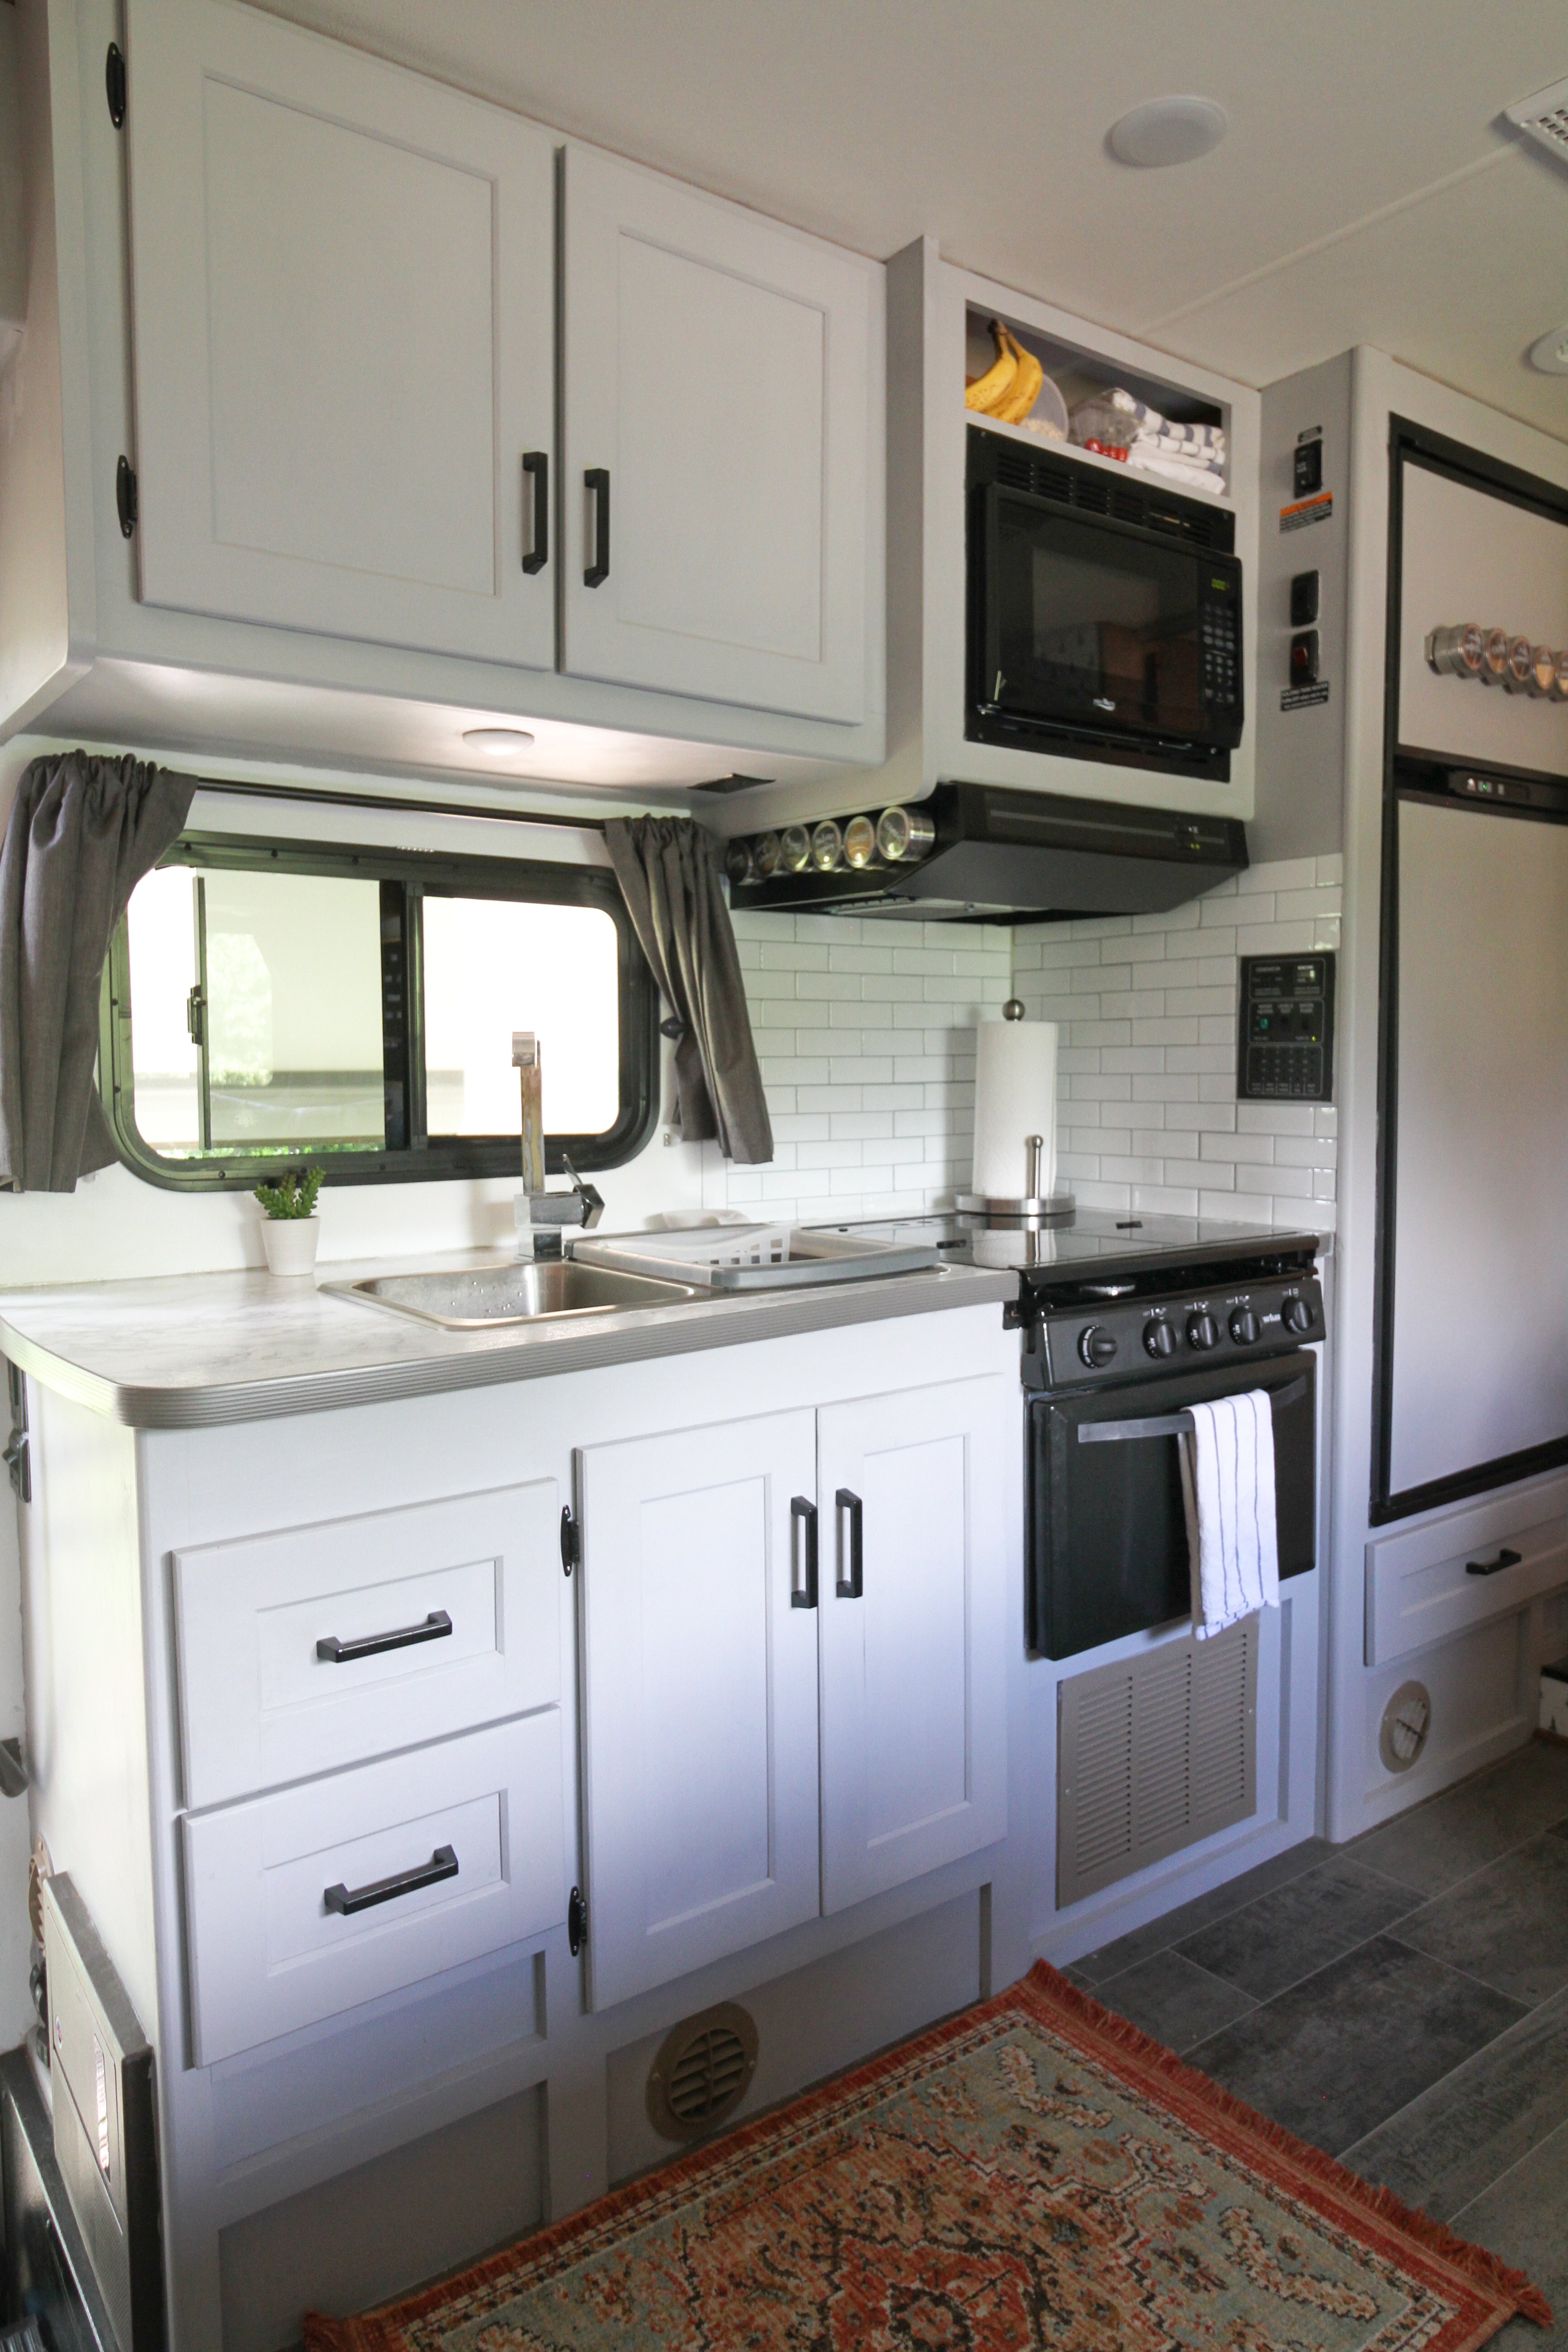 Out of Boundaries RV Kitchen Renovation